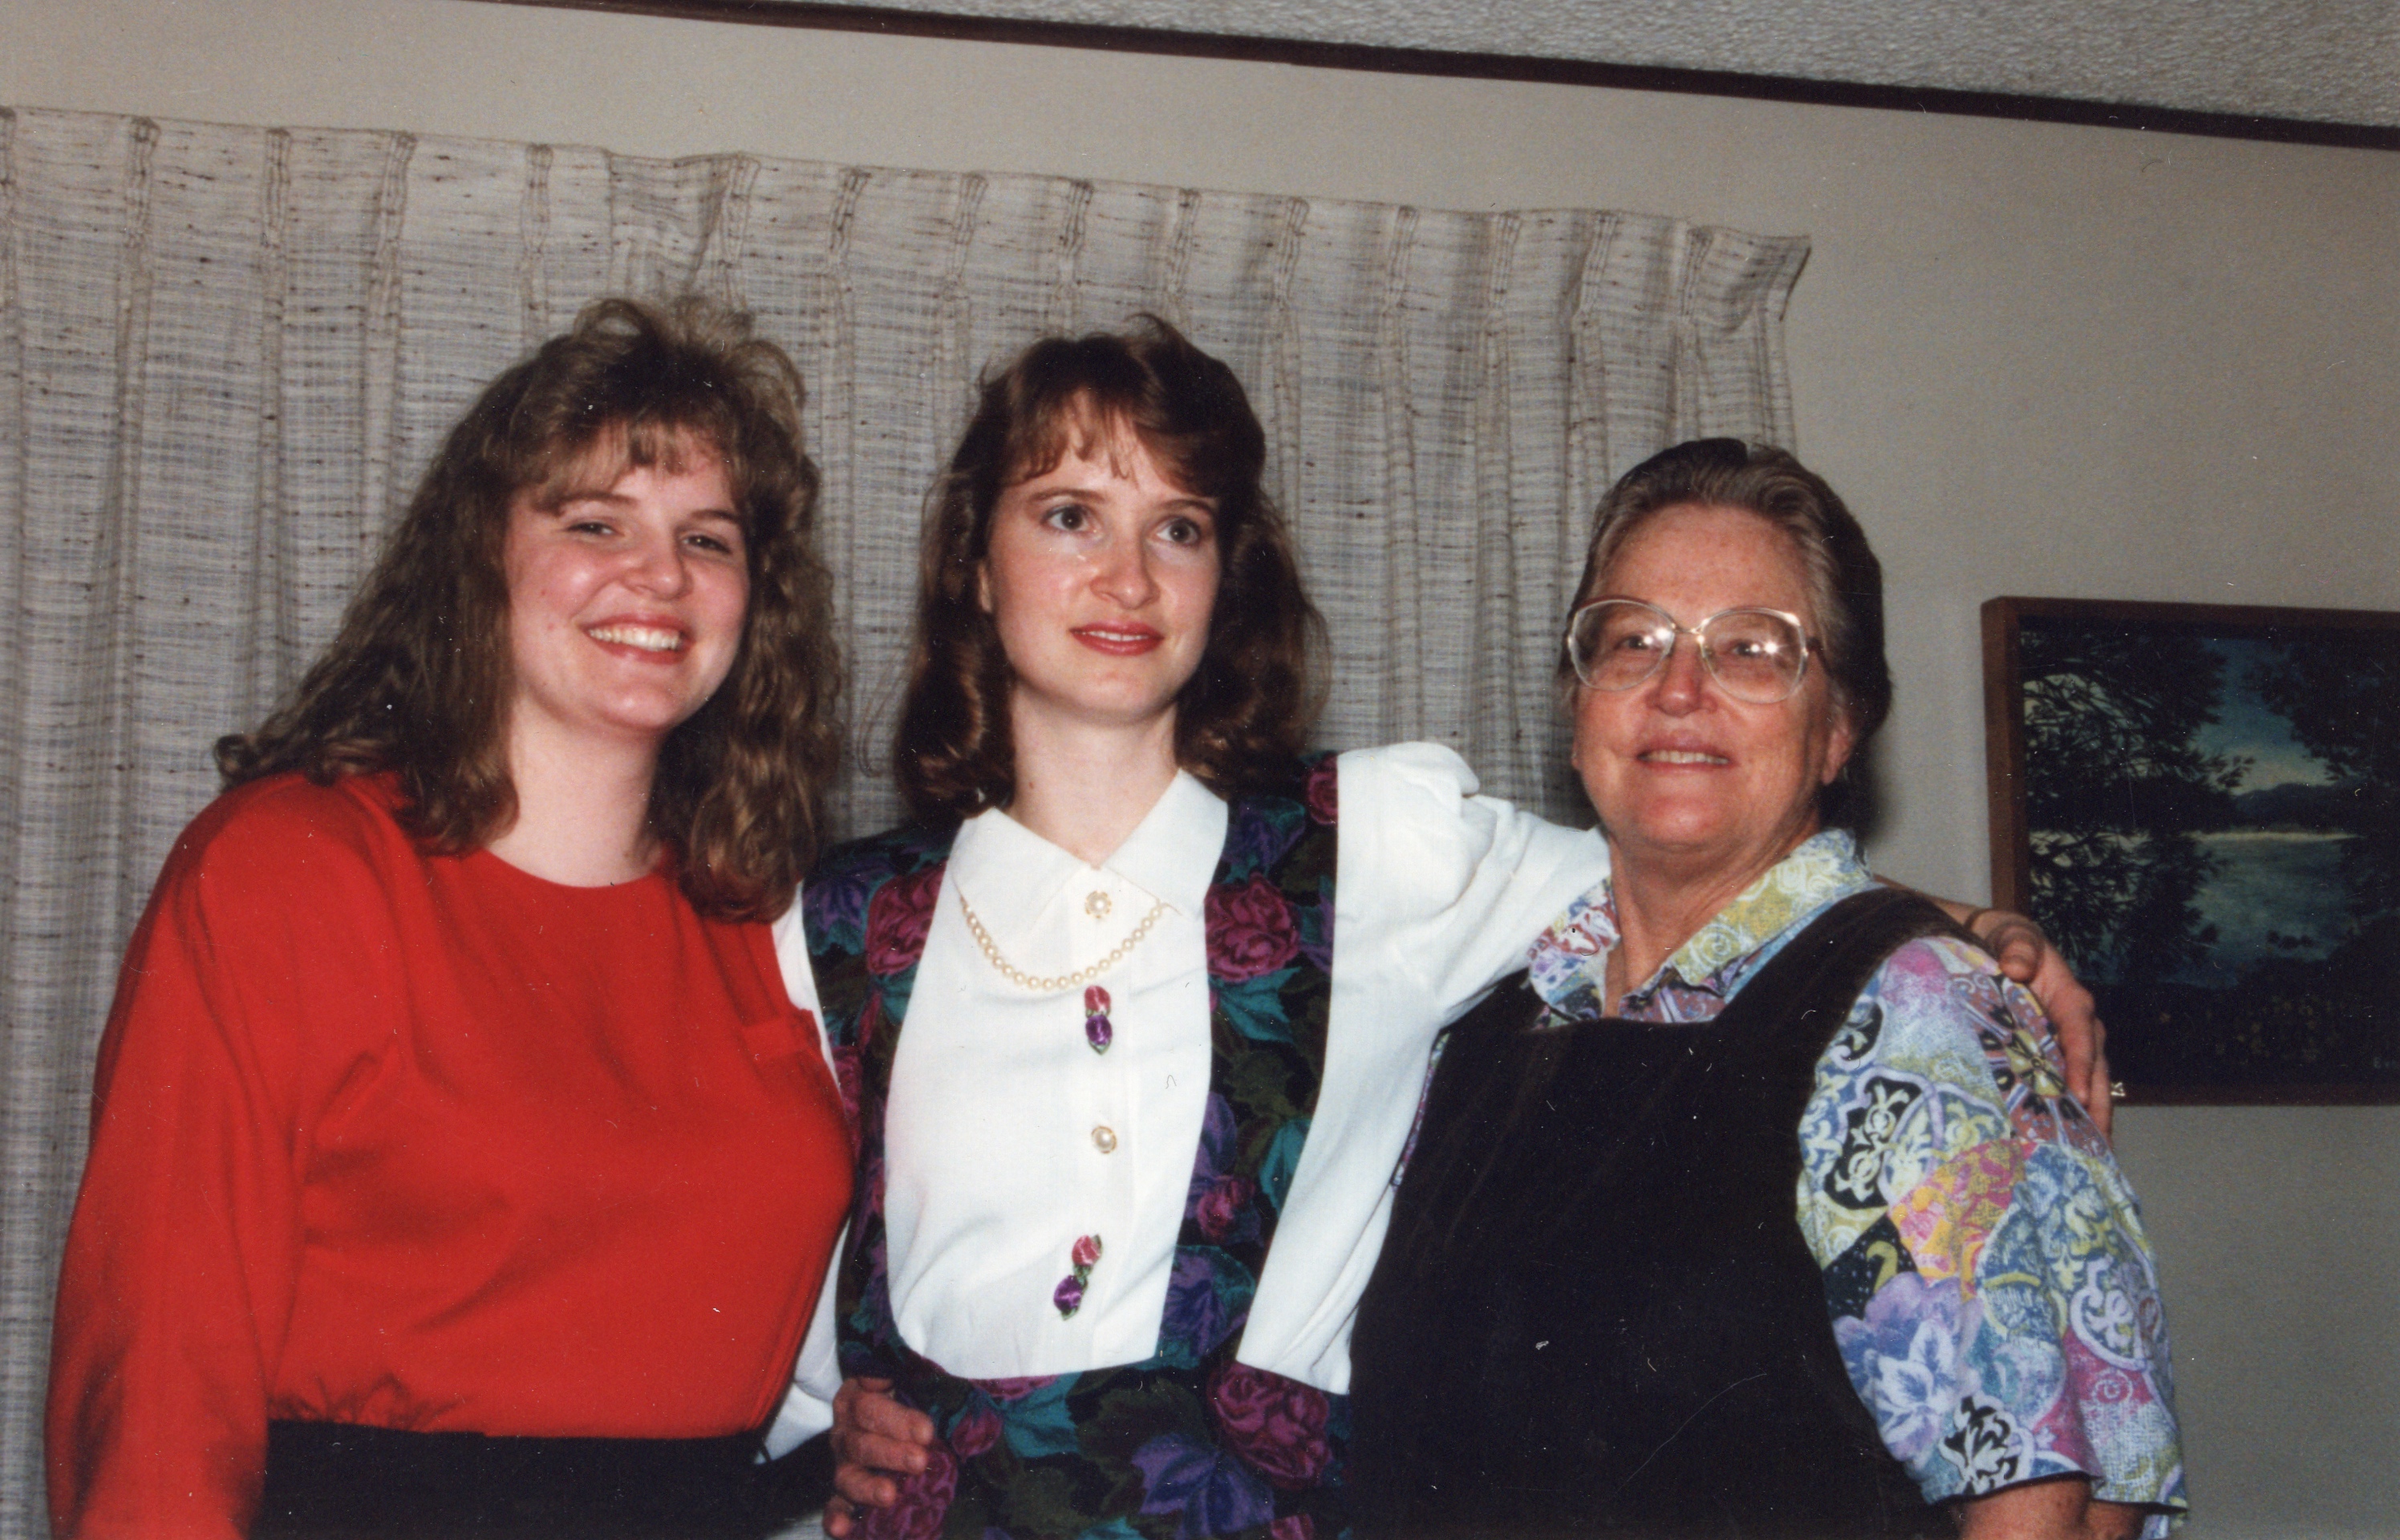 An archive photo of Ervil LeBaron's daughters Adine, Celia and their mother, Anna Mae.